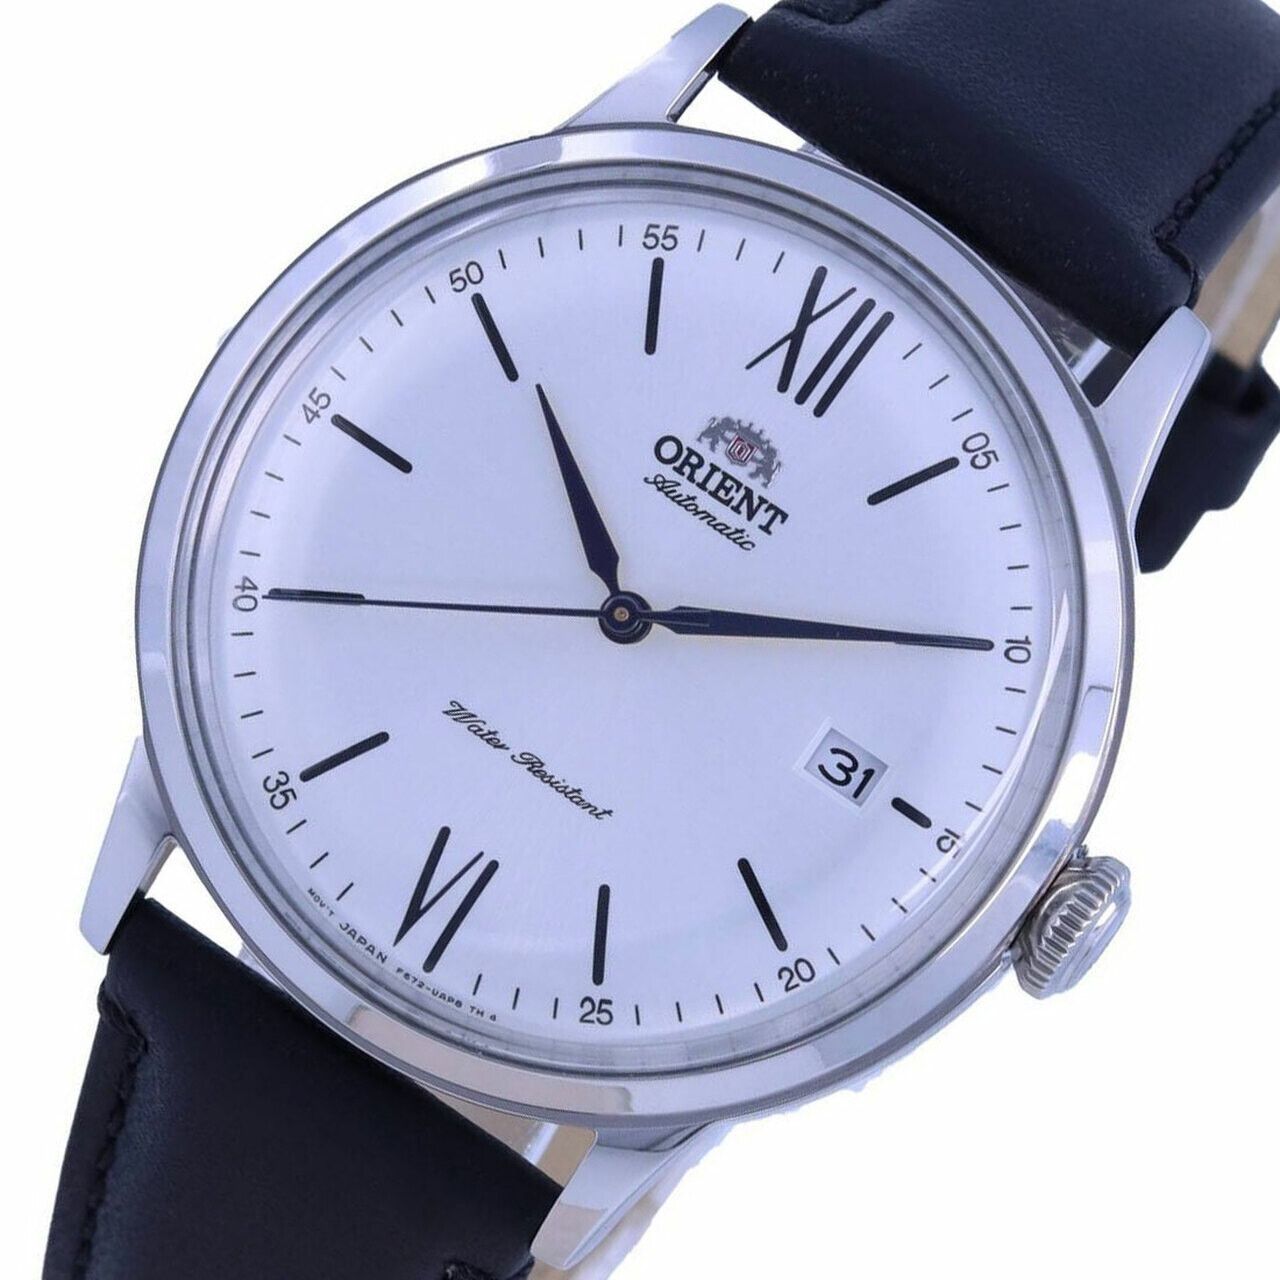 Orient Bambino RA-AC0022S automatic men's watch silver dial 40.5mm leather band self-winding hand-hacking